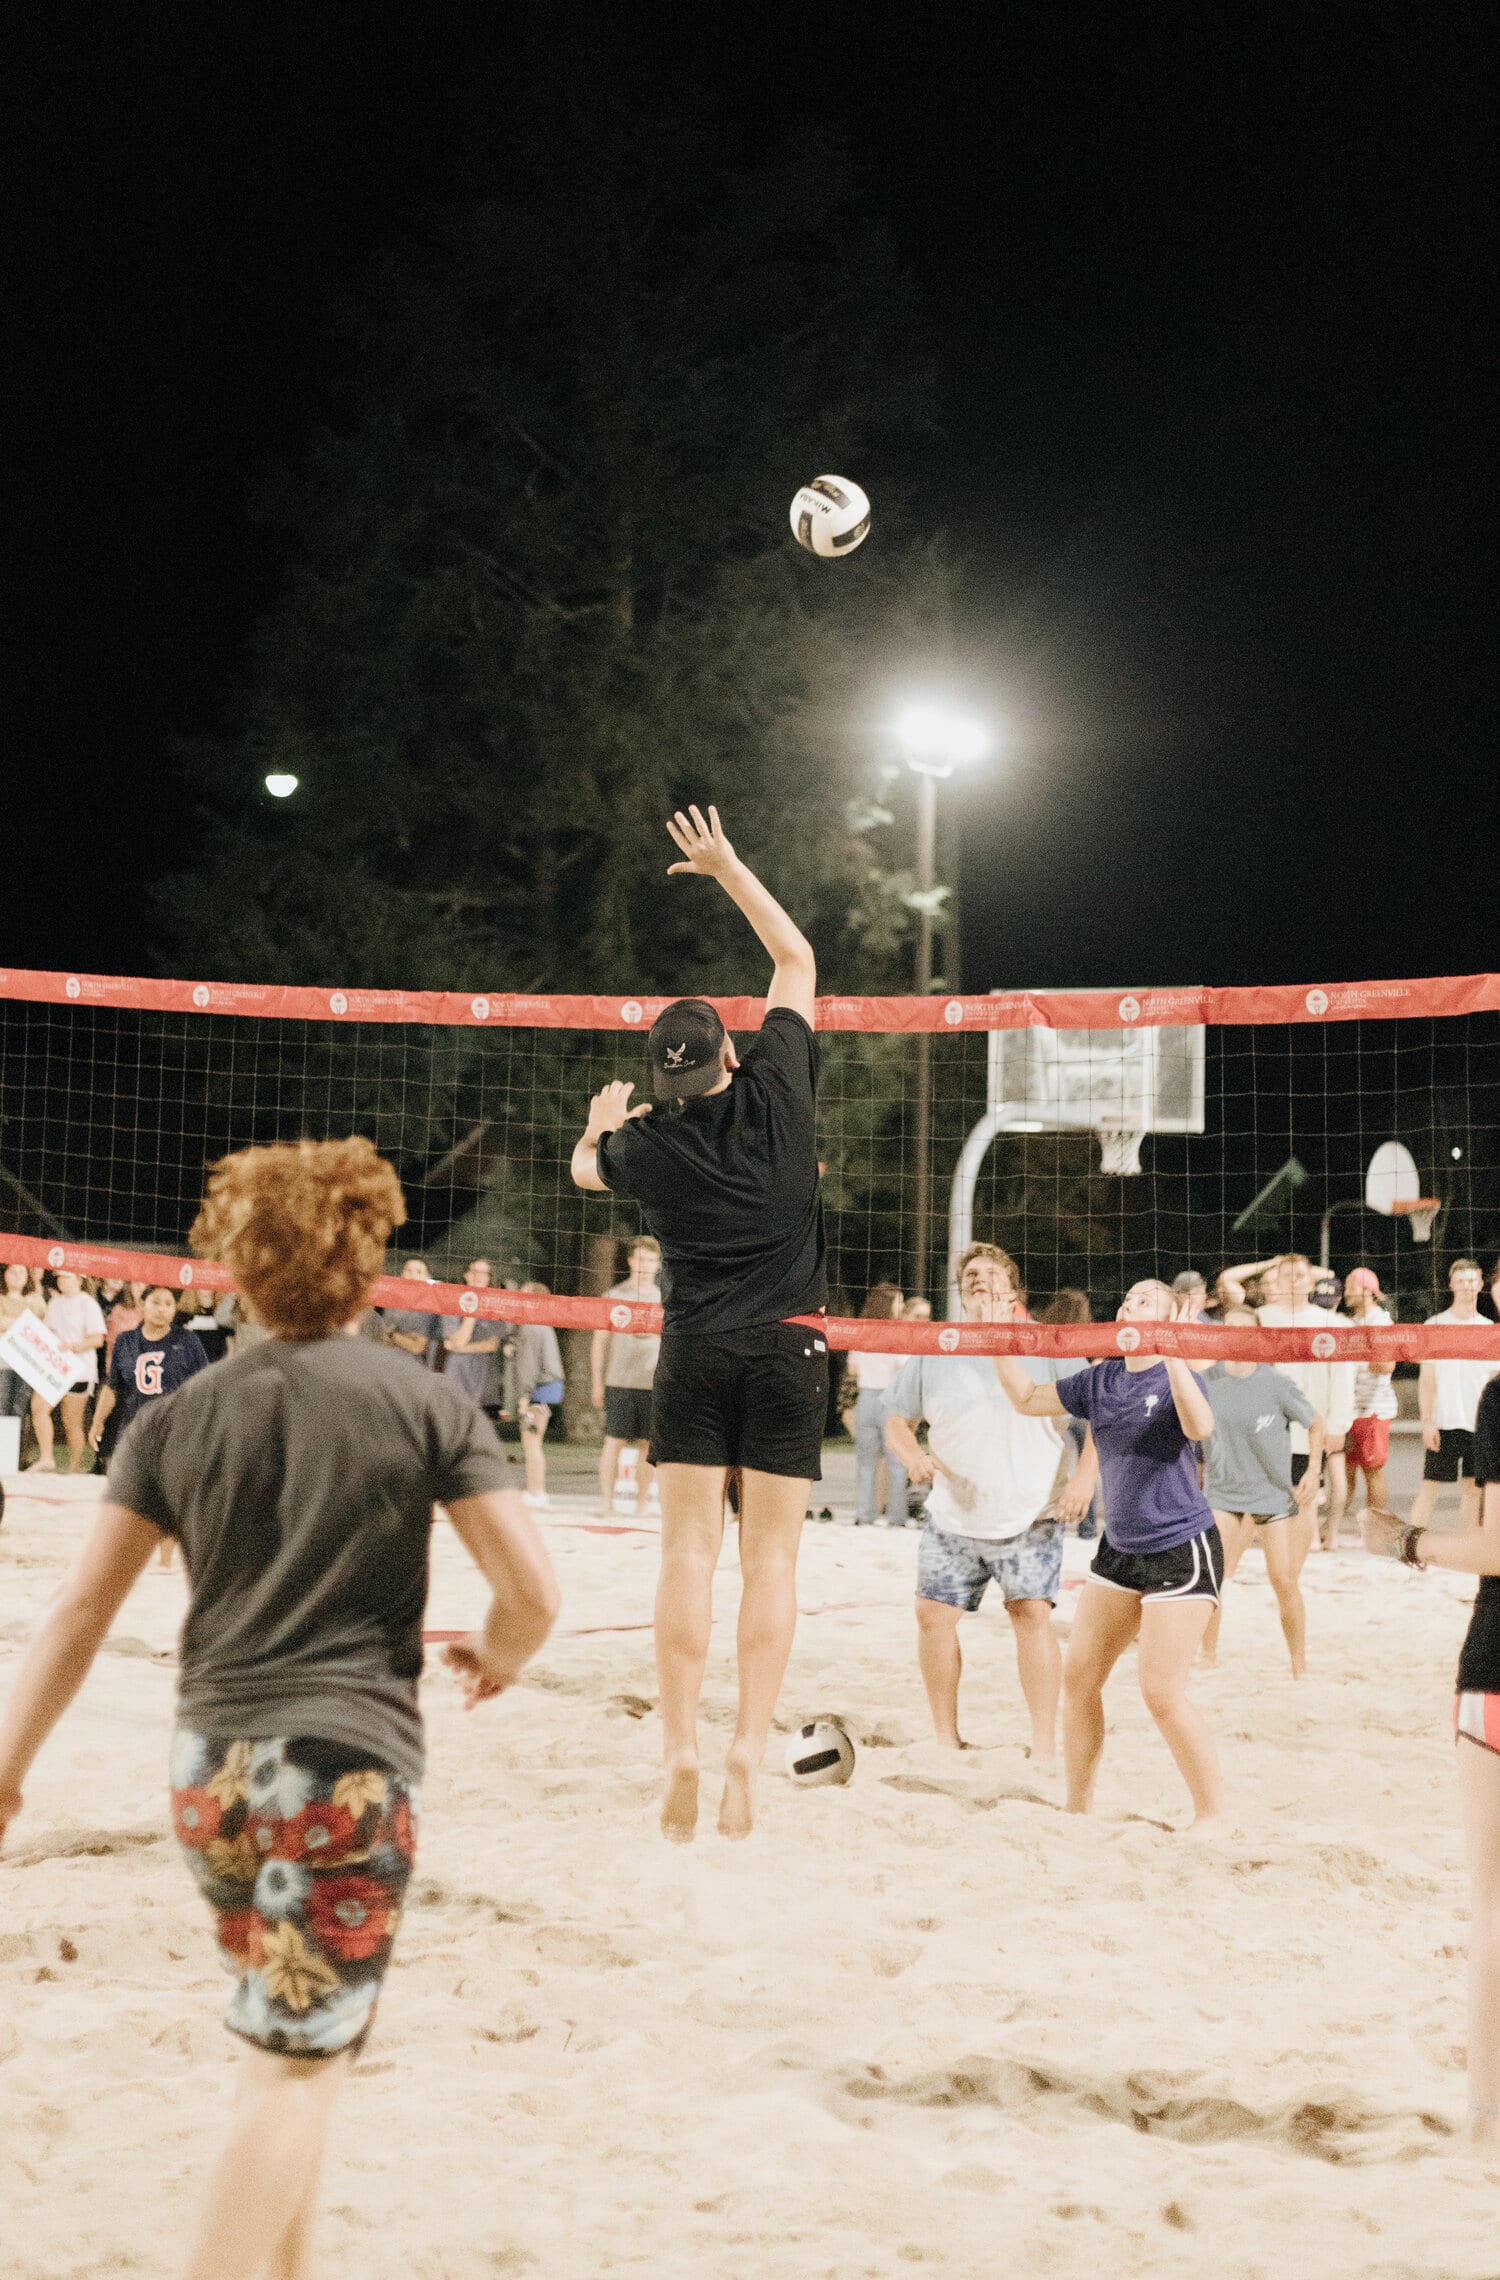 At the opening ceremony volleyball tournament, residence halls compete in games until they lose. Teams play each other until one final winner brings home a championship title, making this an intense event.